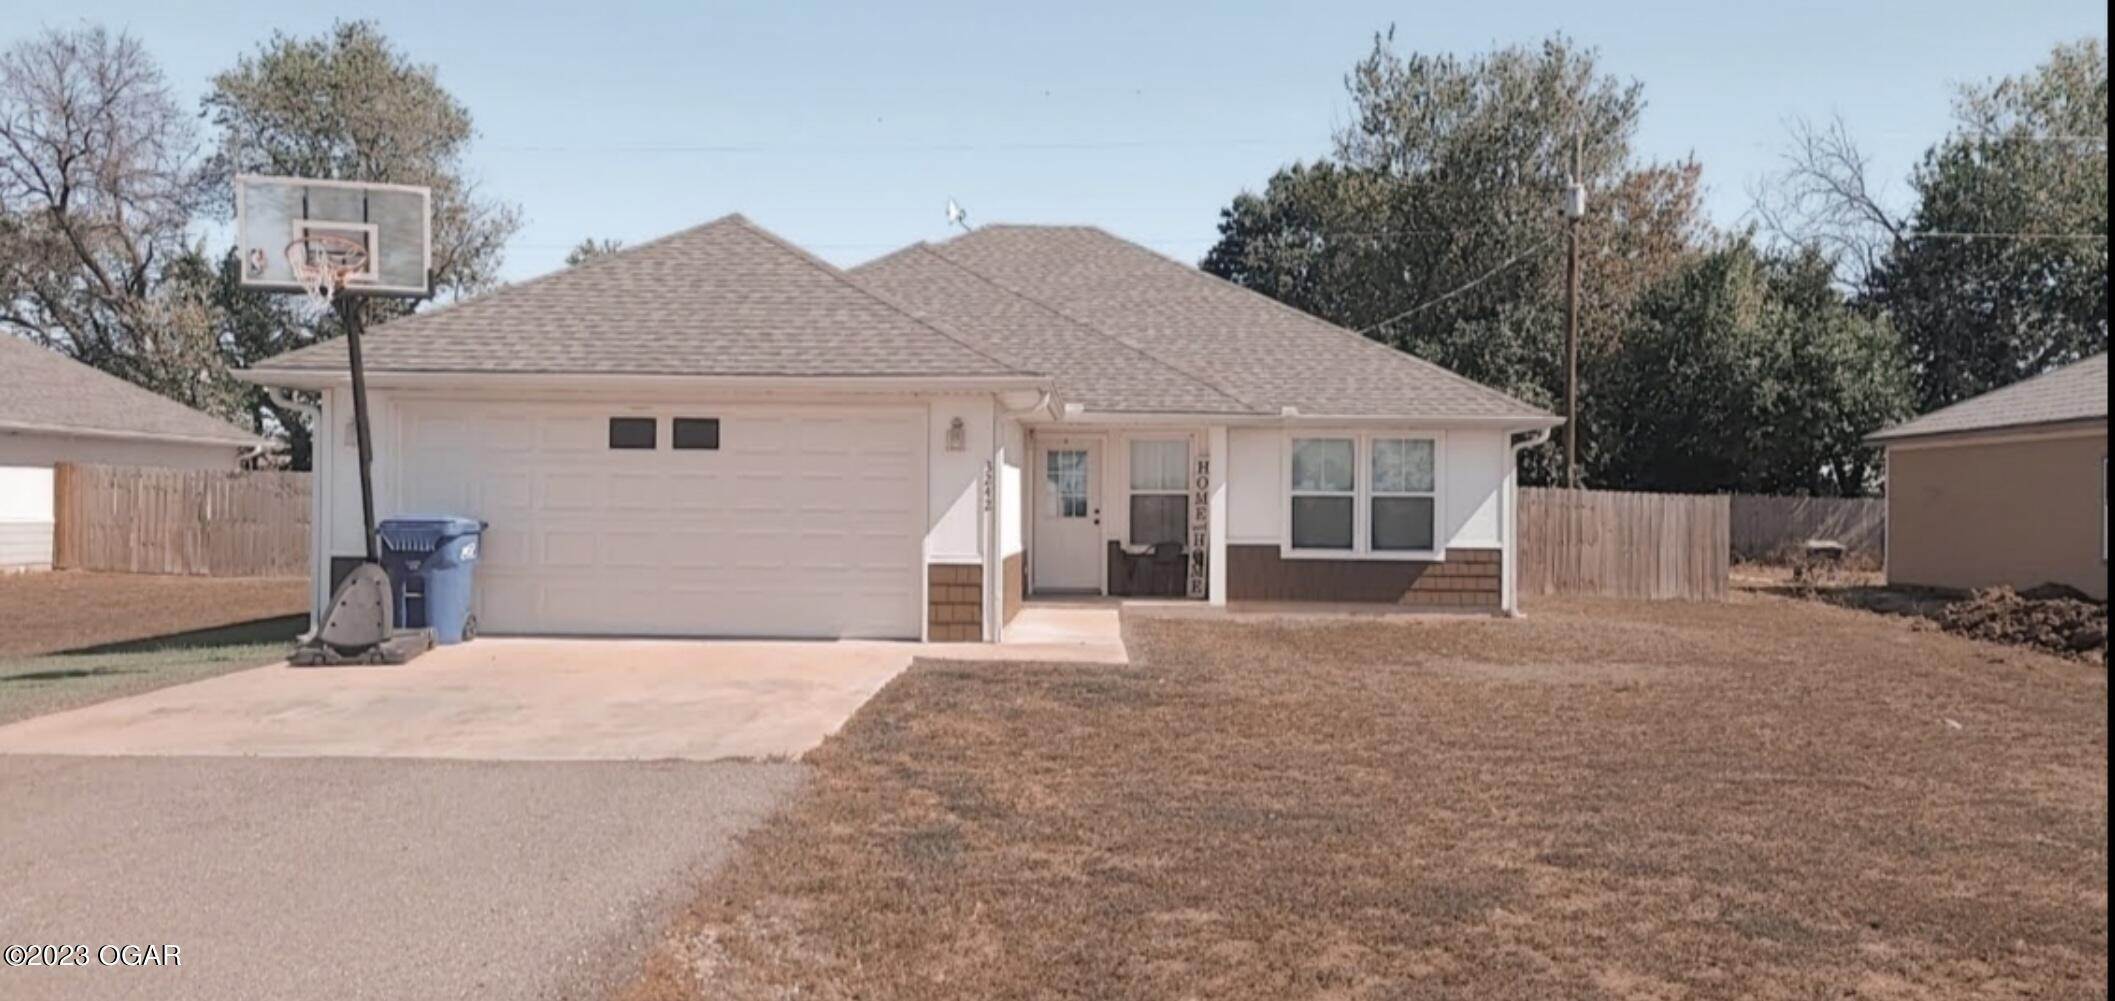 Single Family for Sale at Baxter Springs, KS 66713